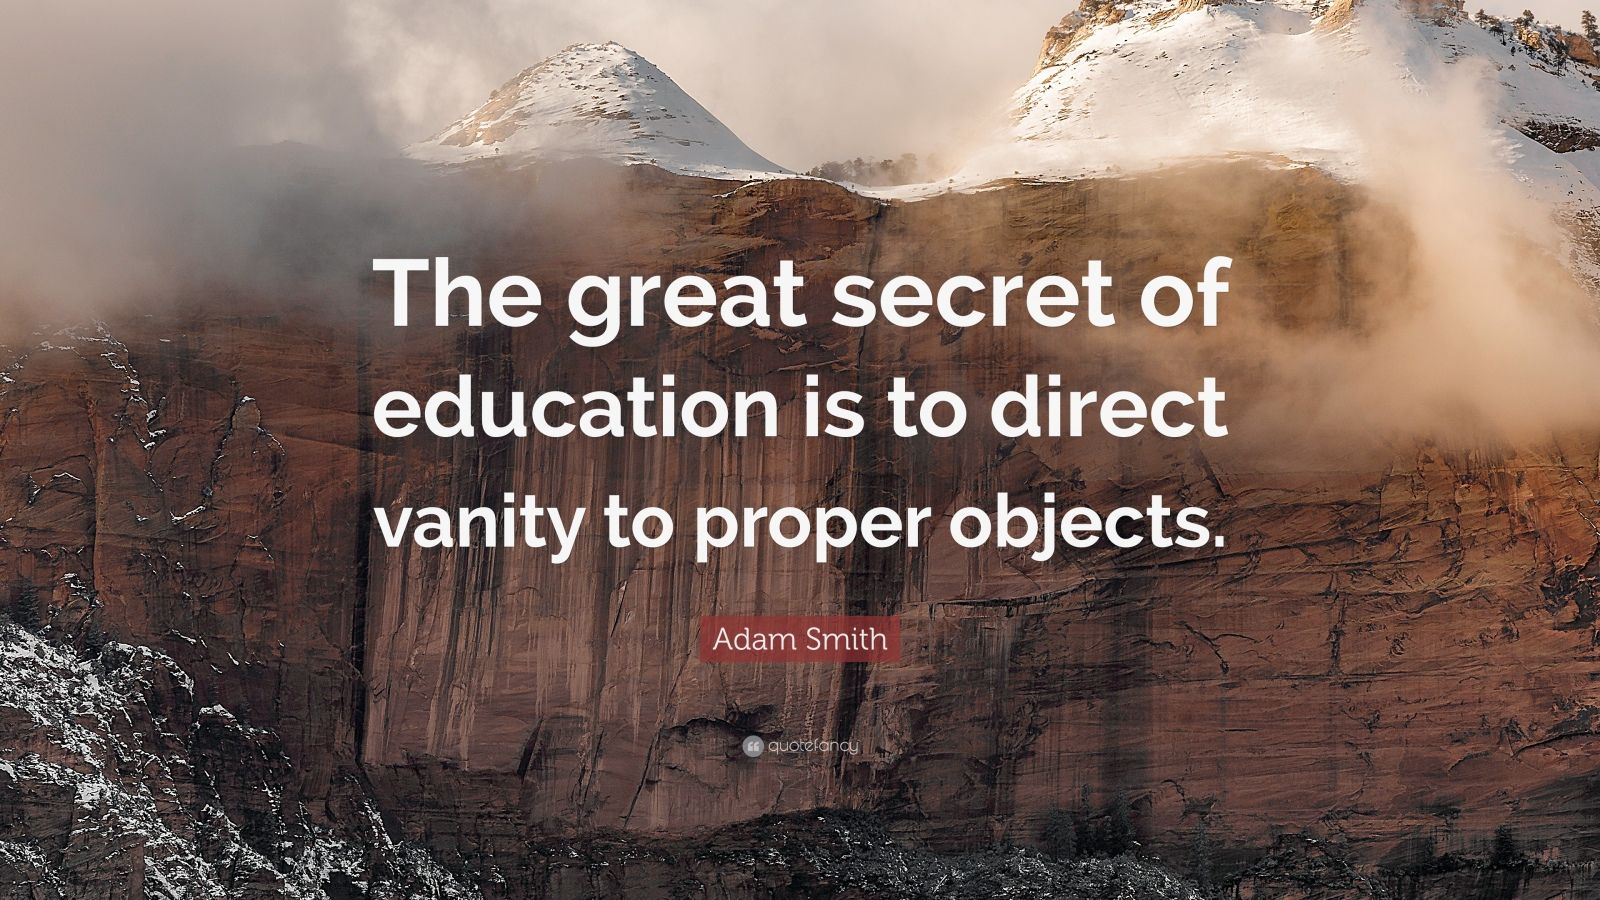 Adam Smith Quote: “The great secret of education is to direct vanity to proper objects.”